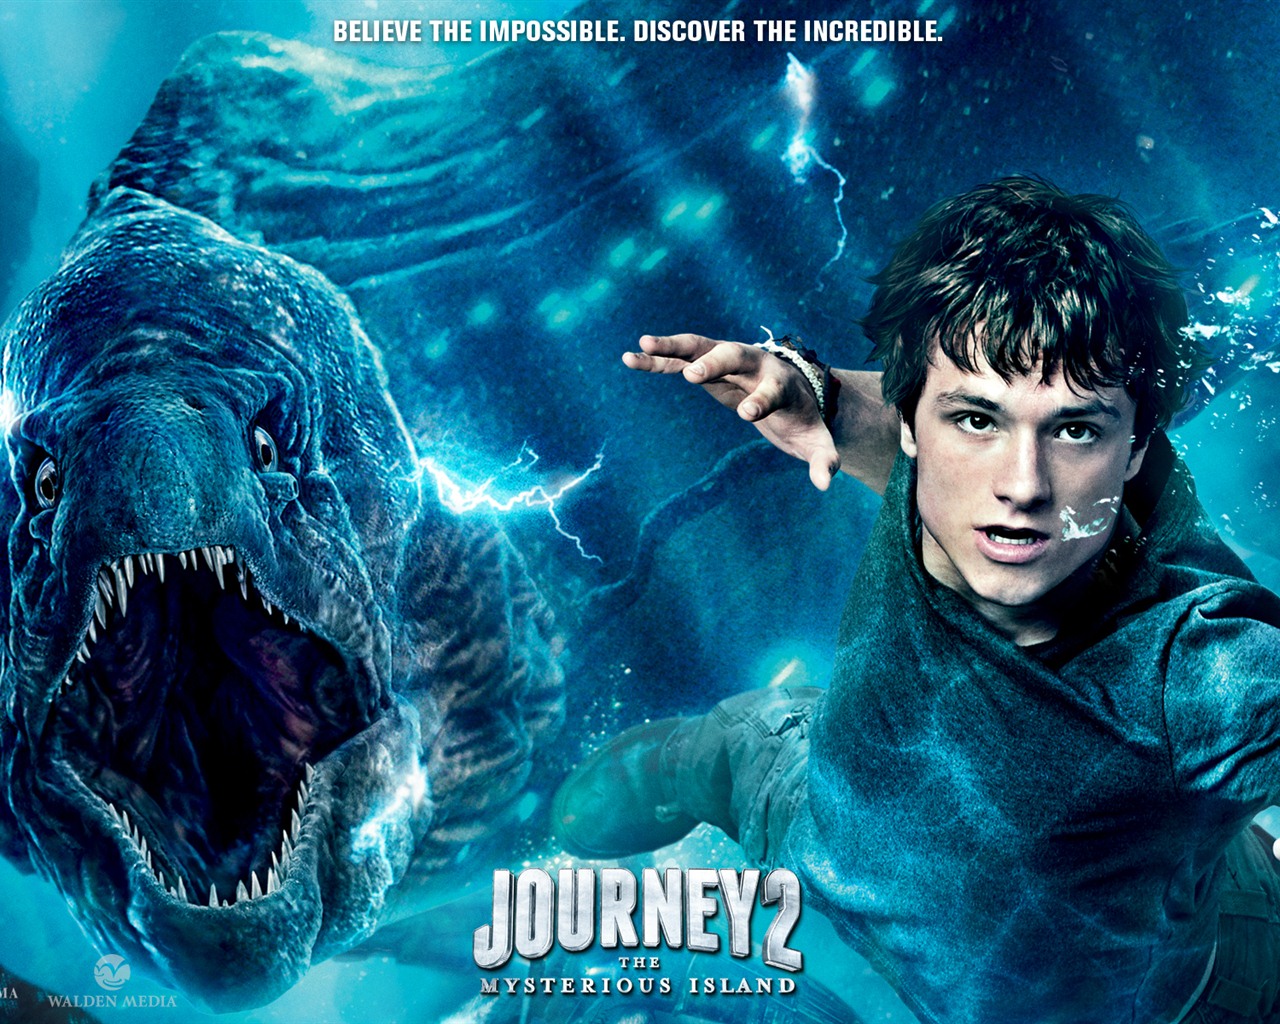 Journey 2: The Mysterious Island HD Wallpaper #3 - 1280x1024